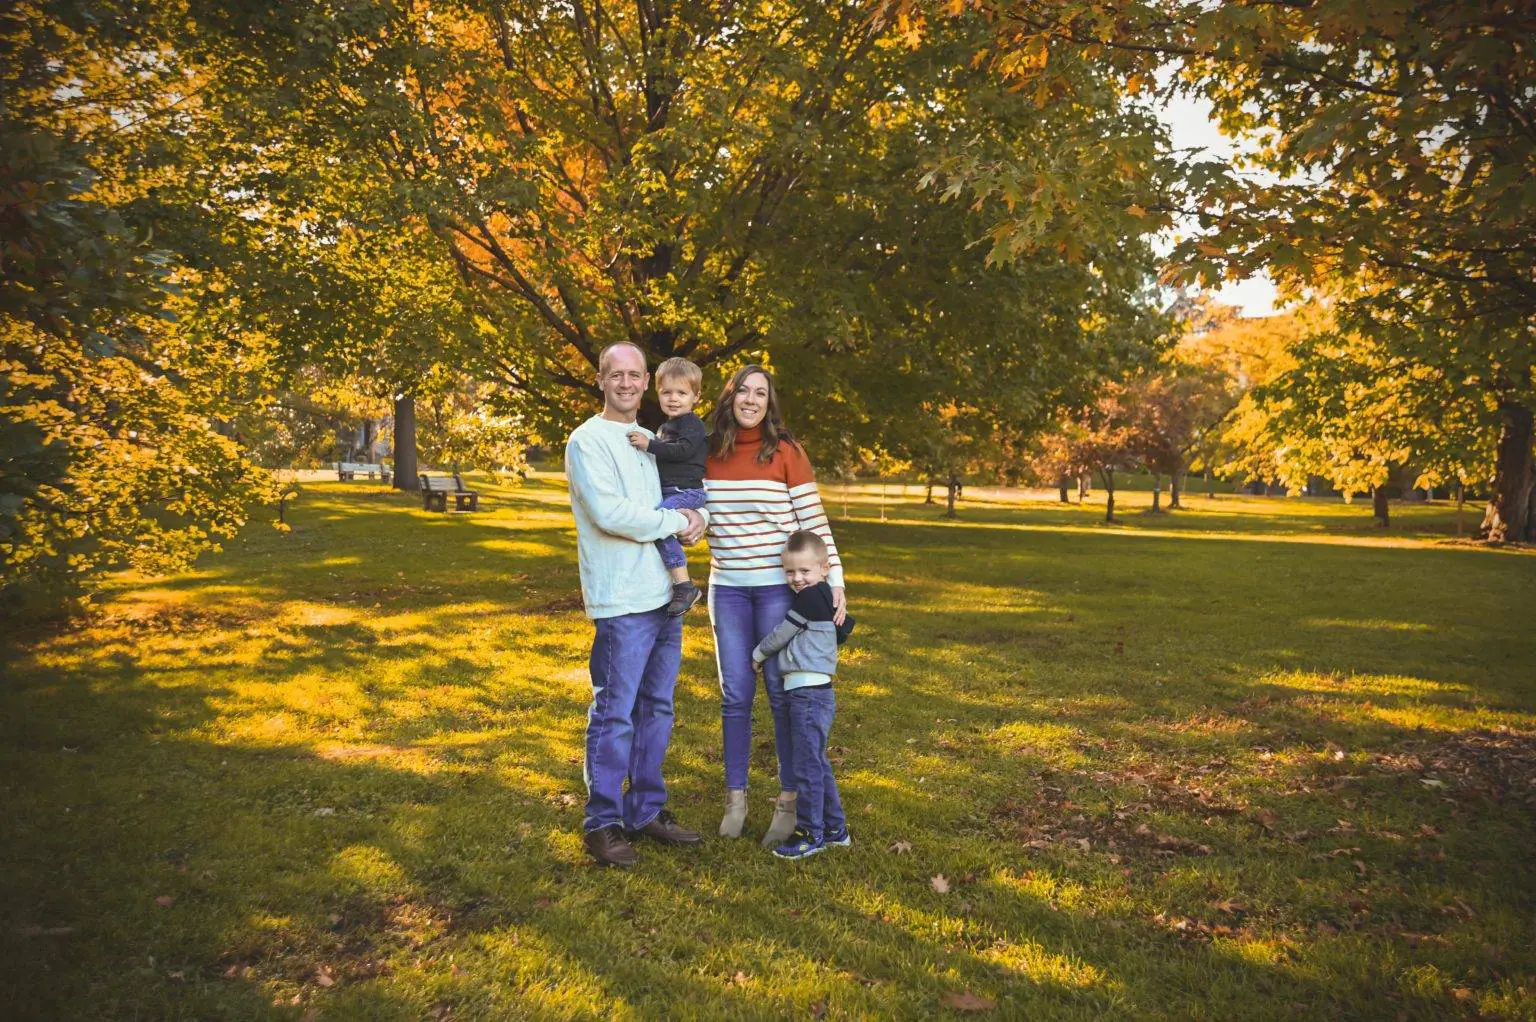 A family is posing for a photo in a park for their maternity photography session.